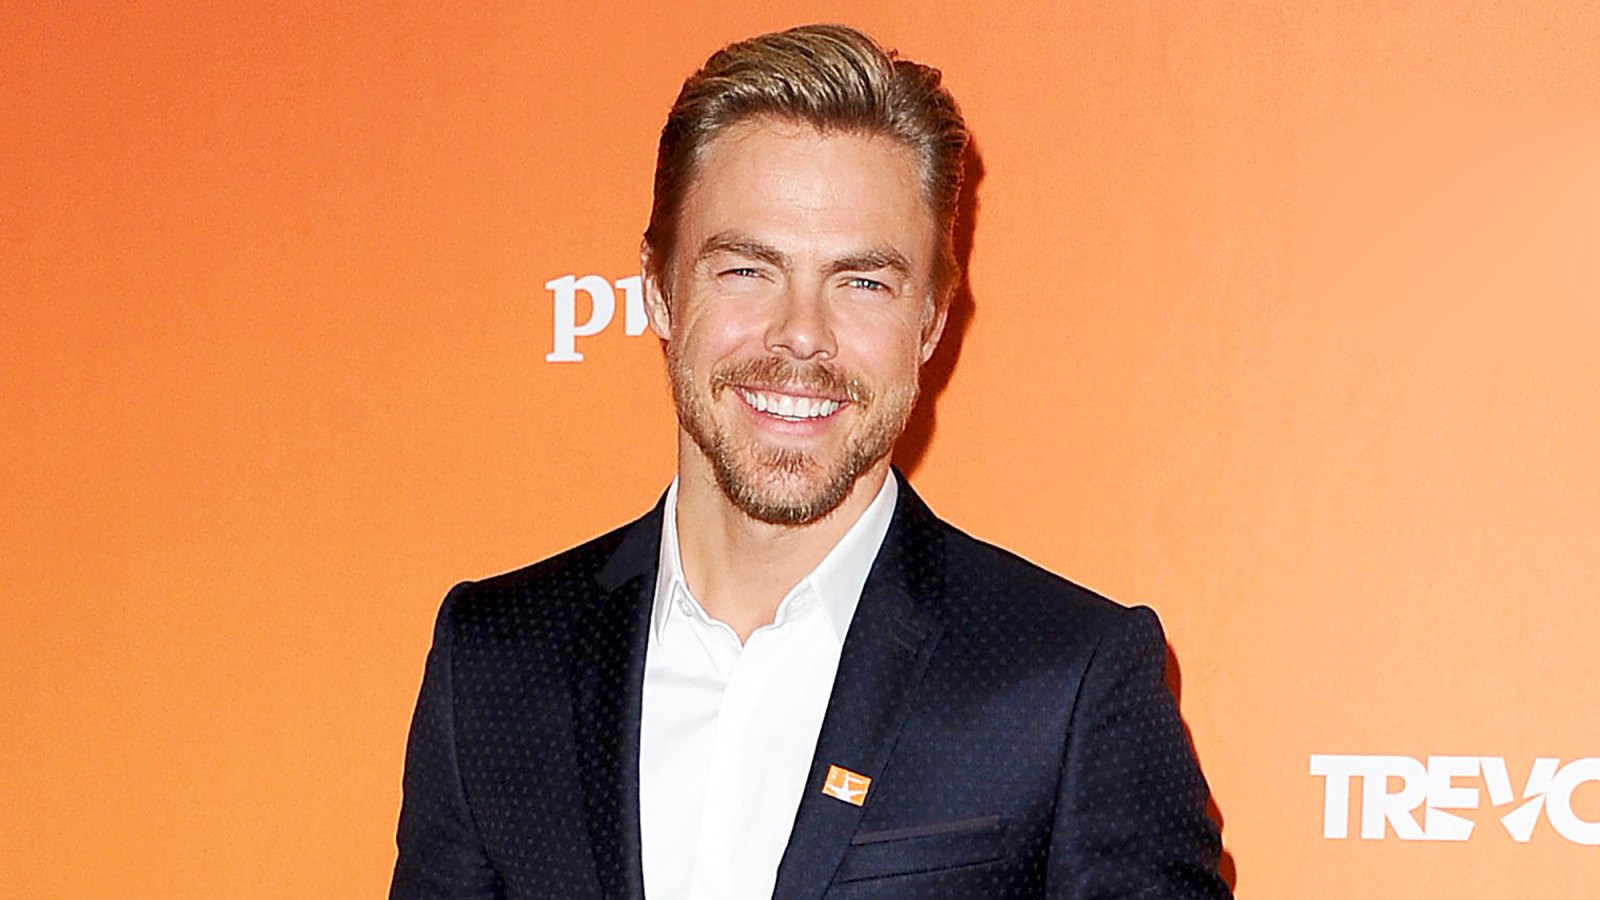 Derek Hough attends The Trevor Project's 2017 TrevorLIVE LA at The Beverly Hilton Hotel in Beverly Hills, California.